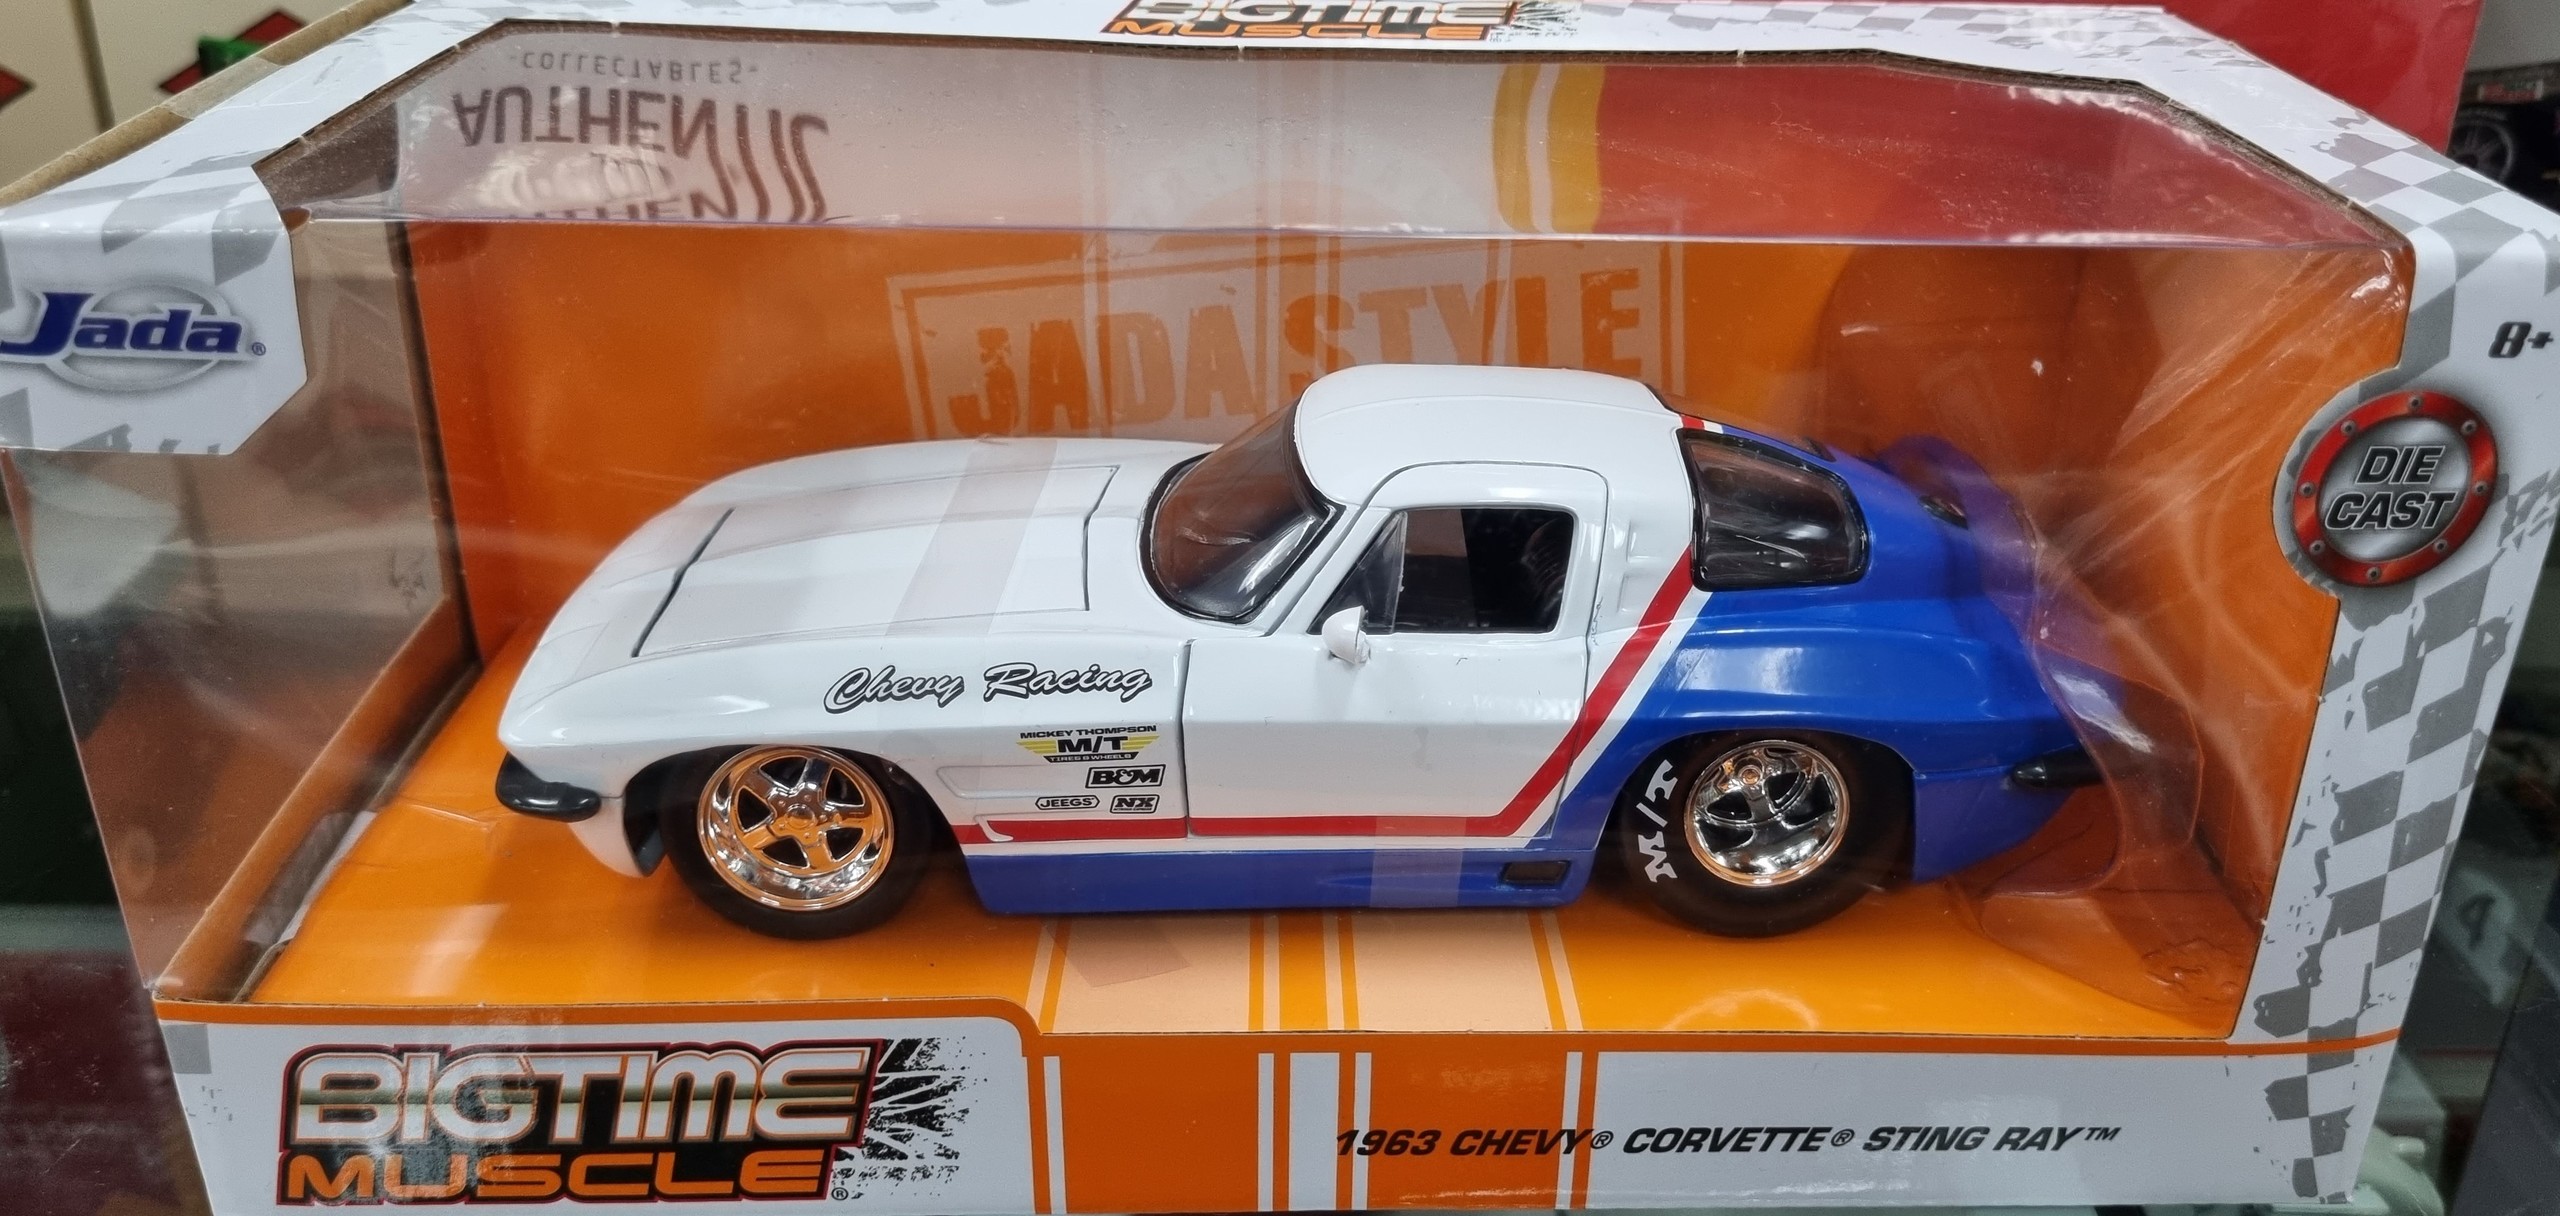 1963 Chevy Corvette Sting Ray Jada Big Time Muscle 1/24